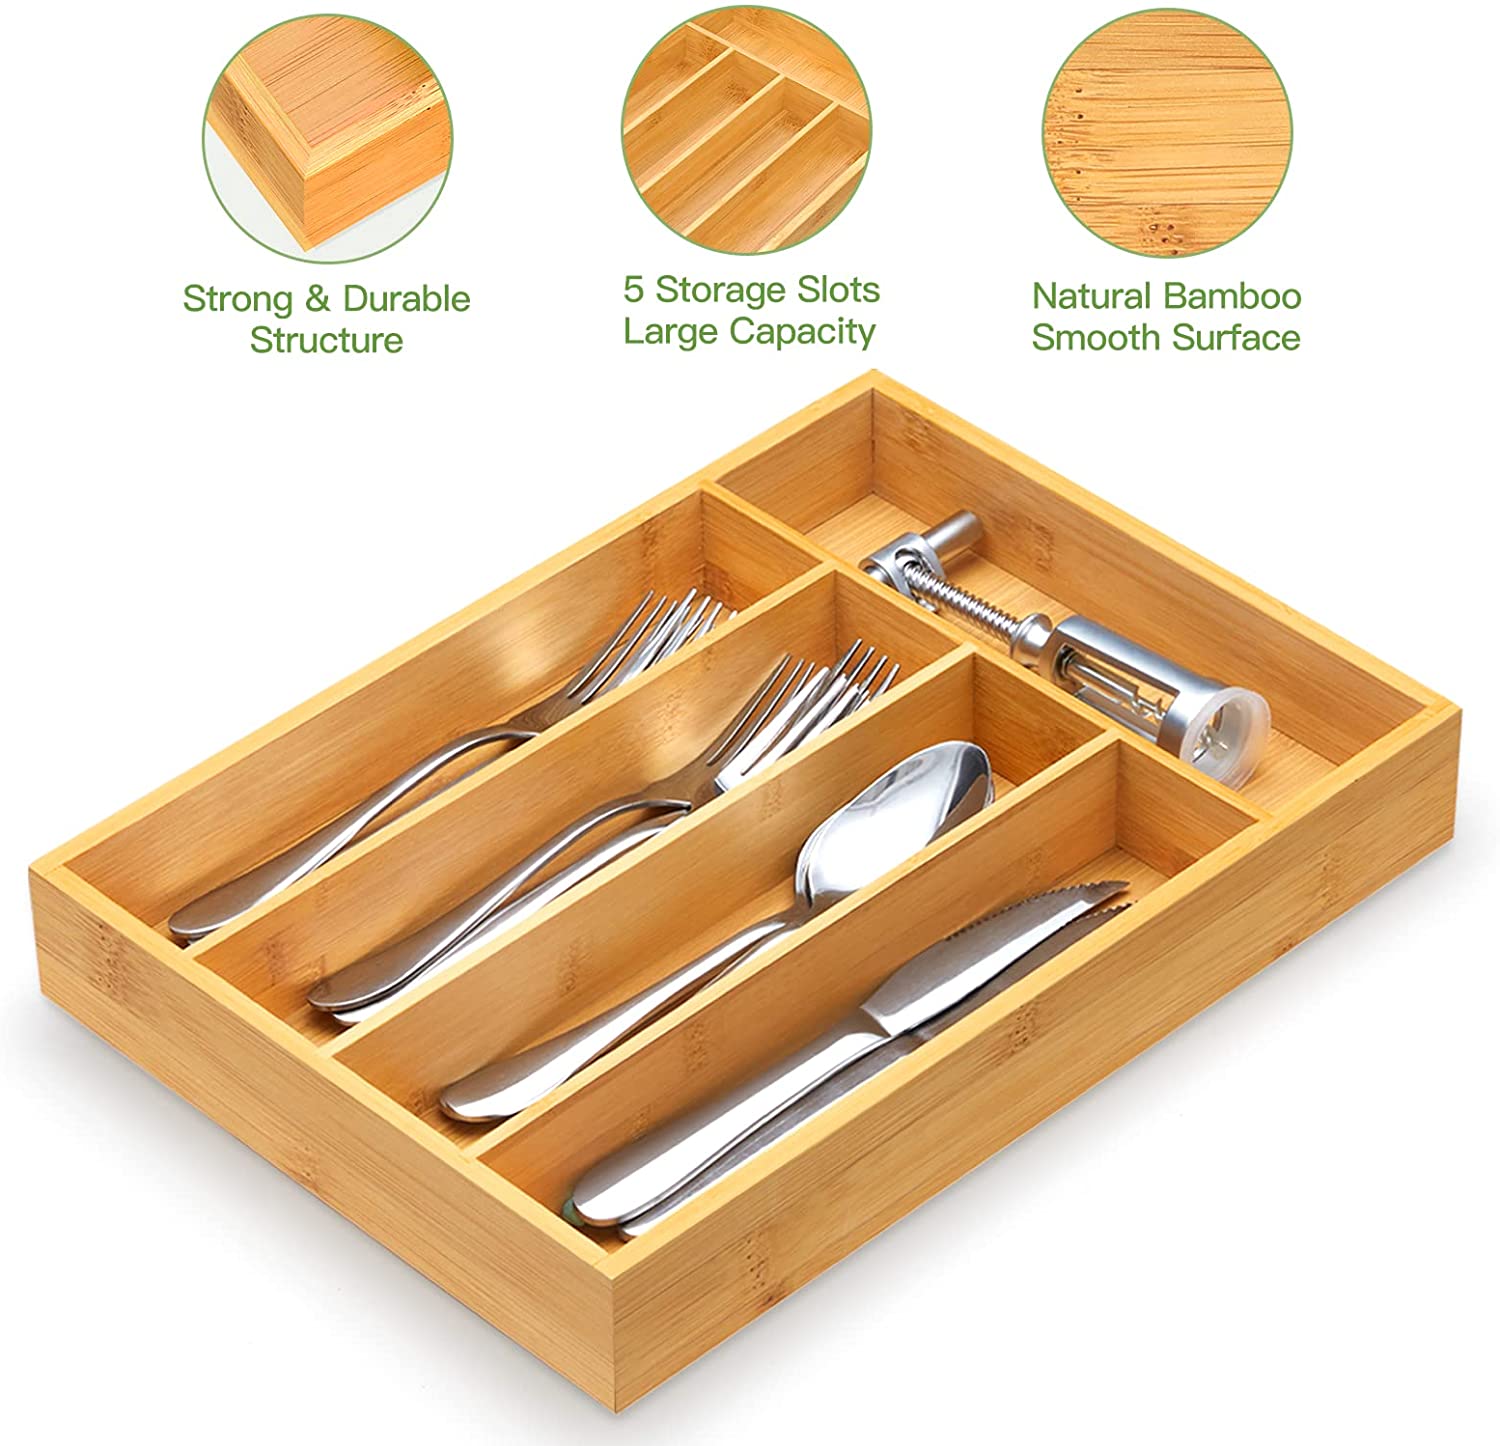 Bamboo Kitchen Drawer Organizer Wooden Silverware Utensil Tray Holder with 5 Small Narrow Compartments for Cutlery Spoons Forks Knives Storage Flatware Organizer by FURNINXS (14x10.5x2 inch?